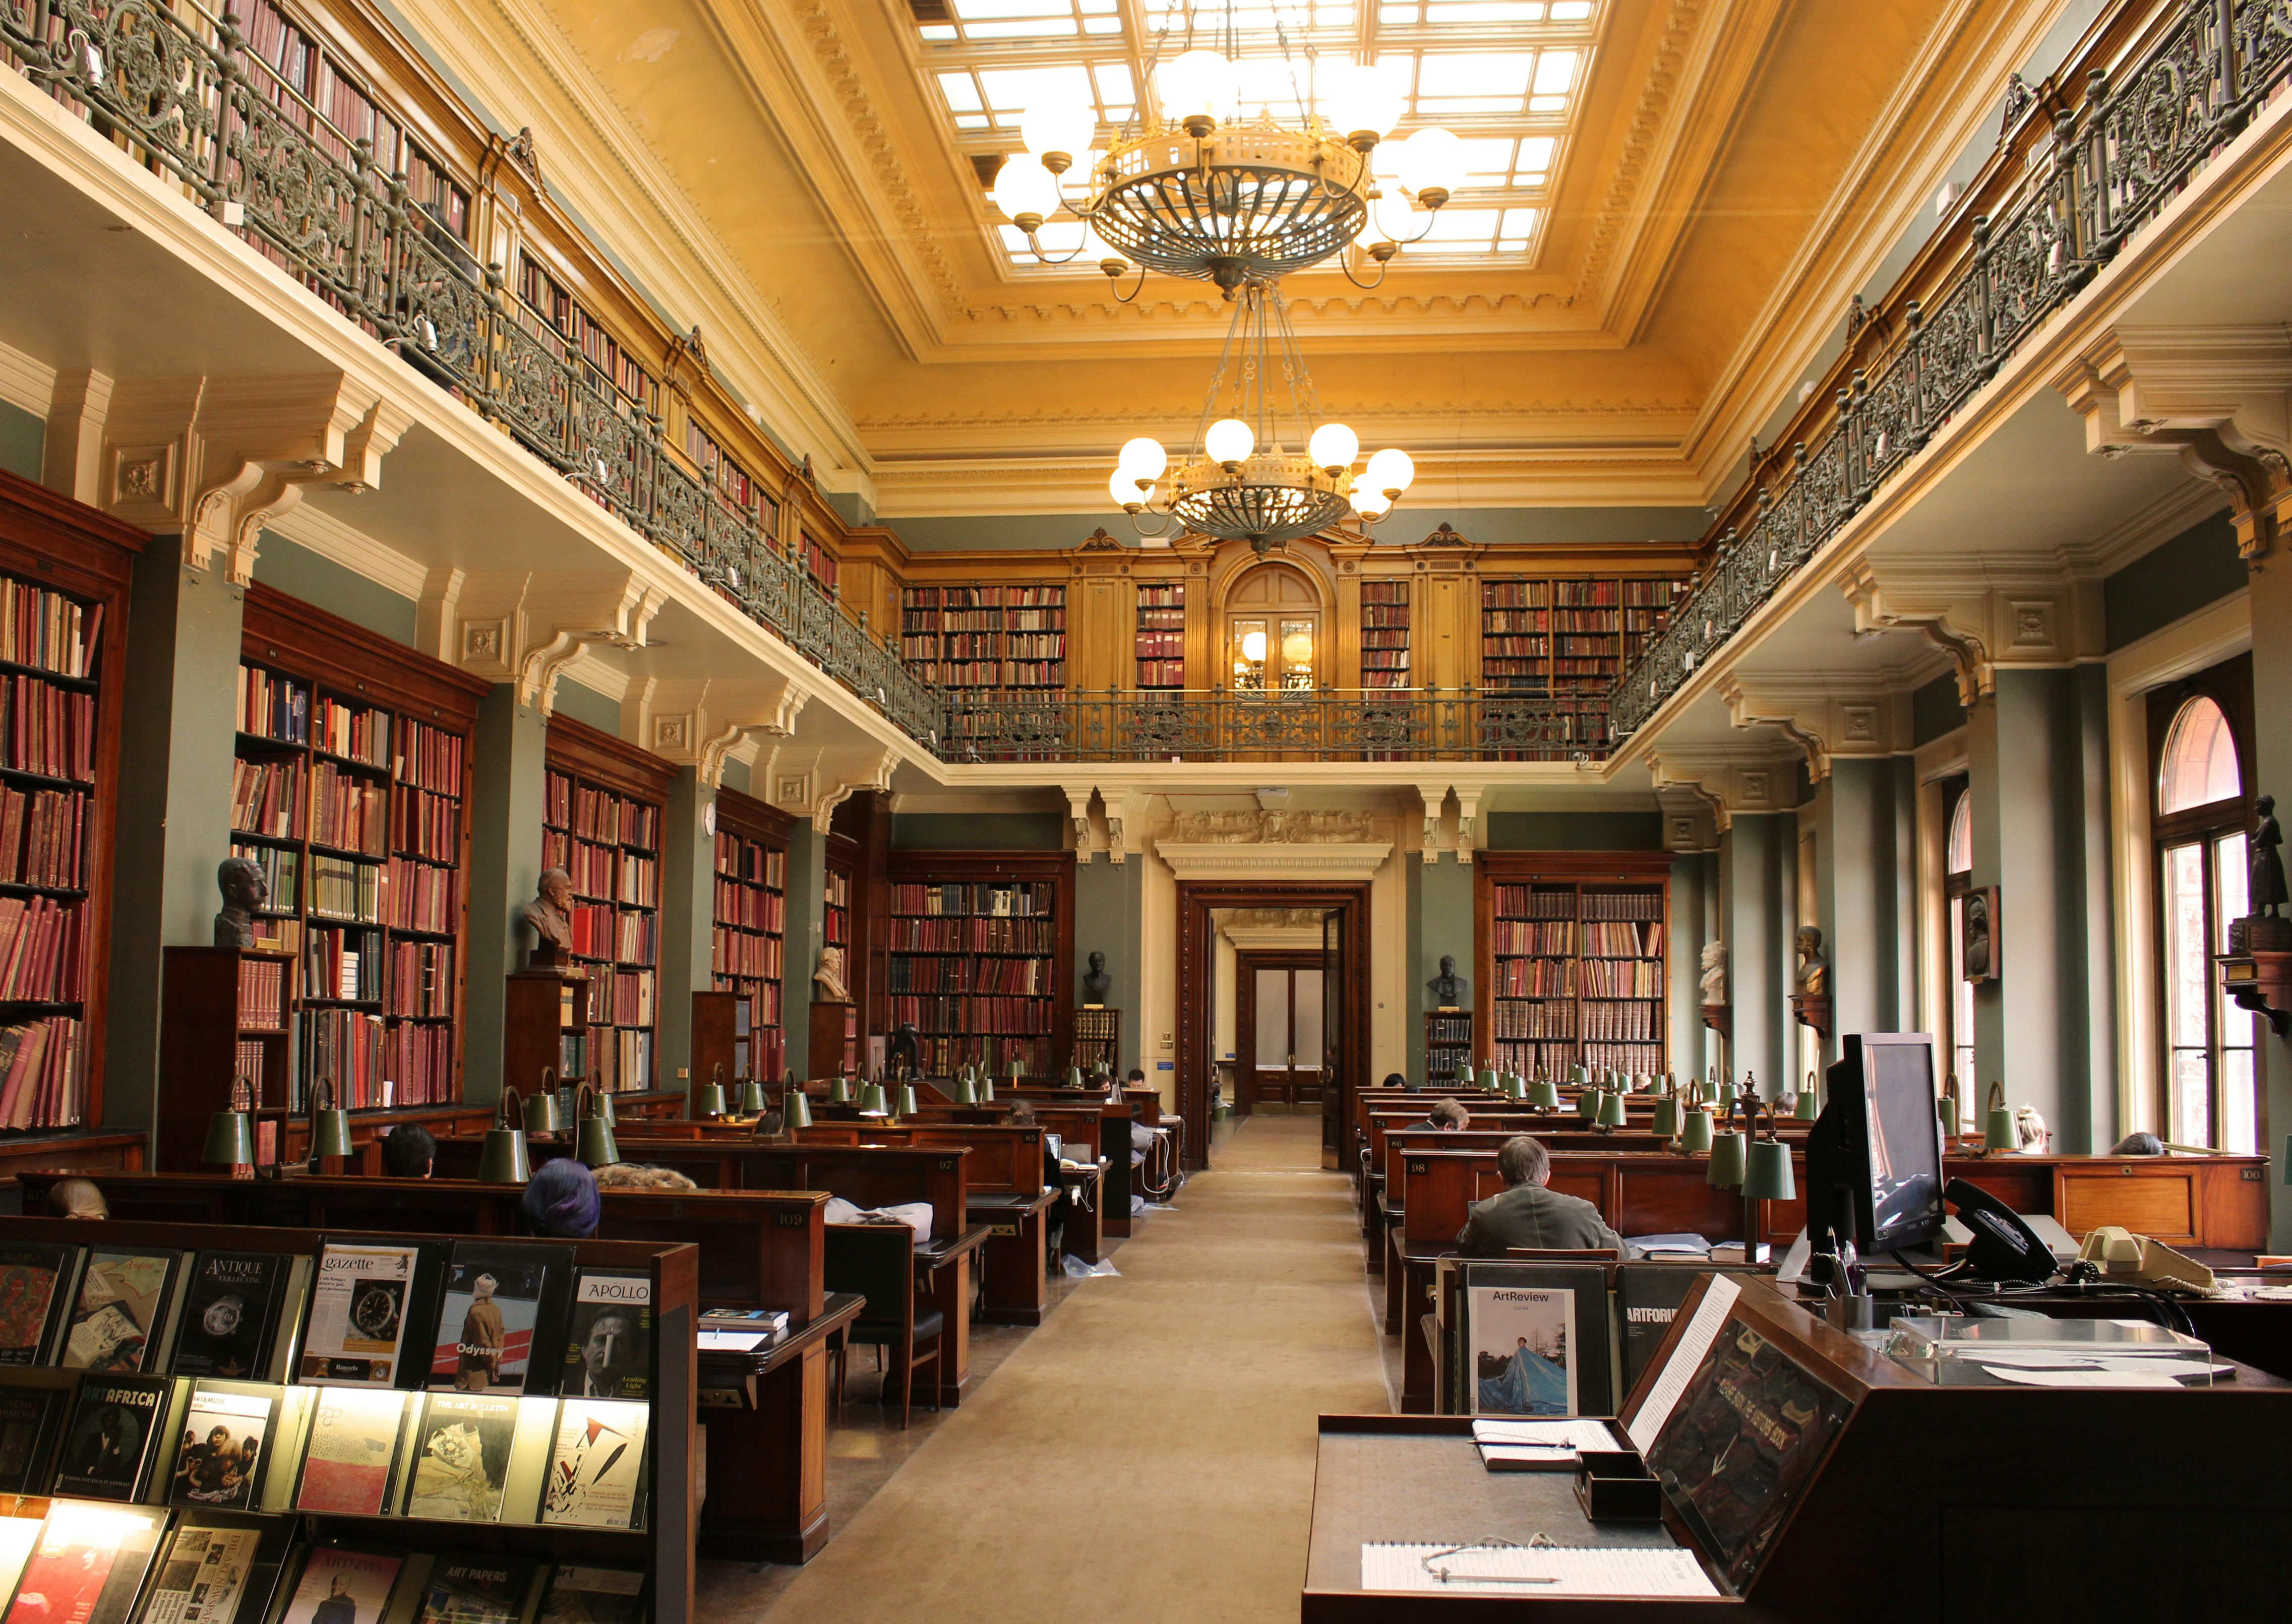 Study vibes in London’s National Art Library